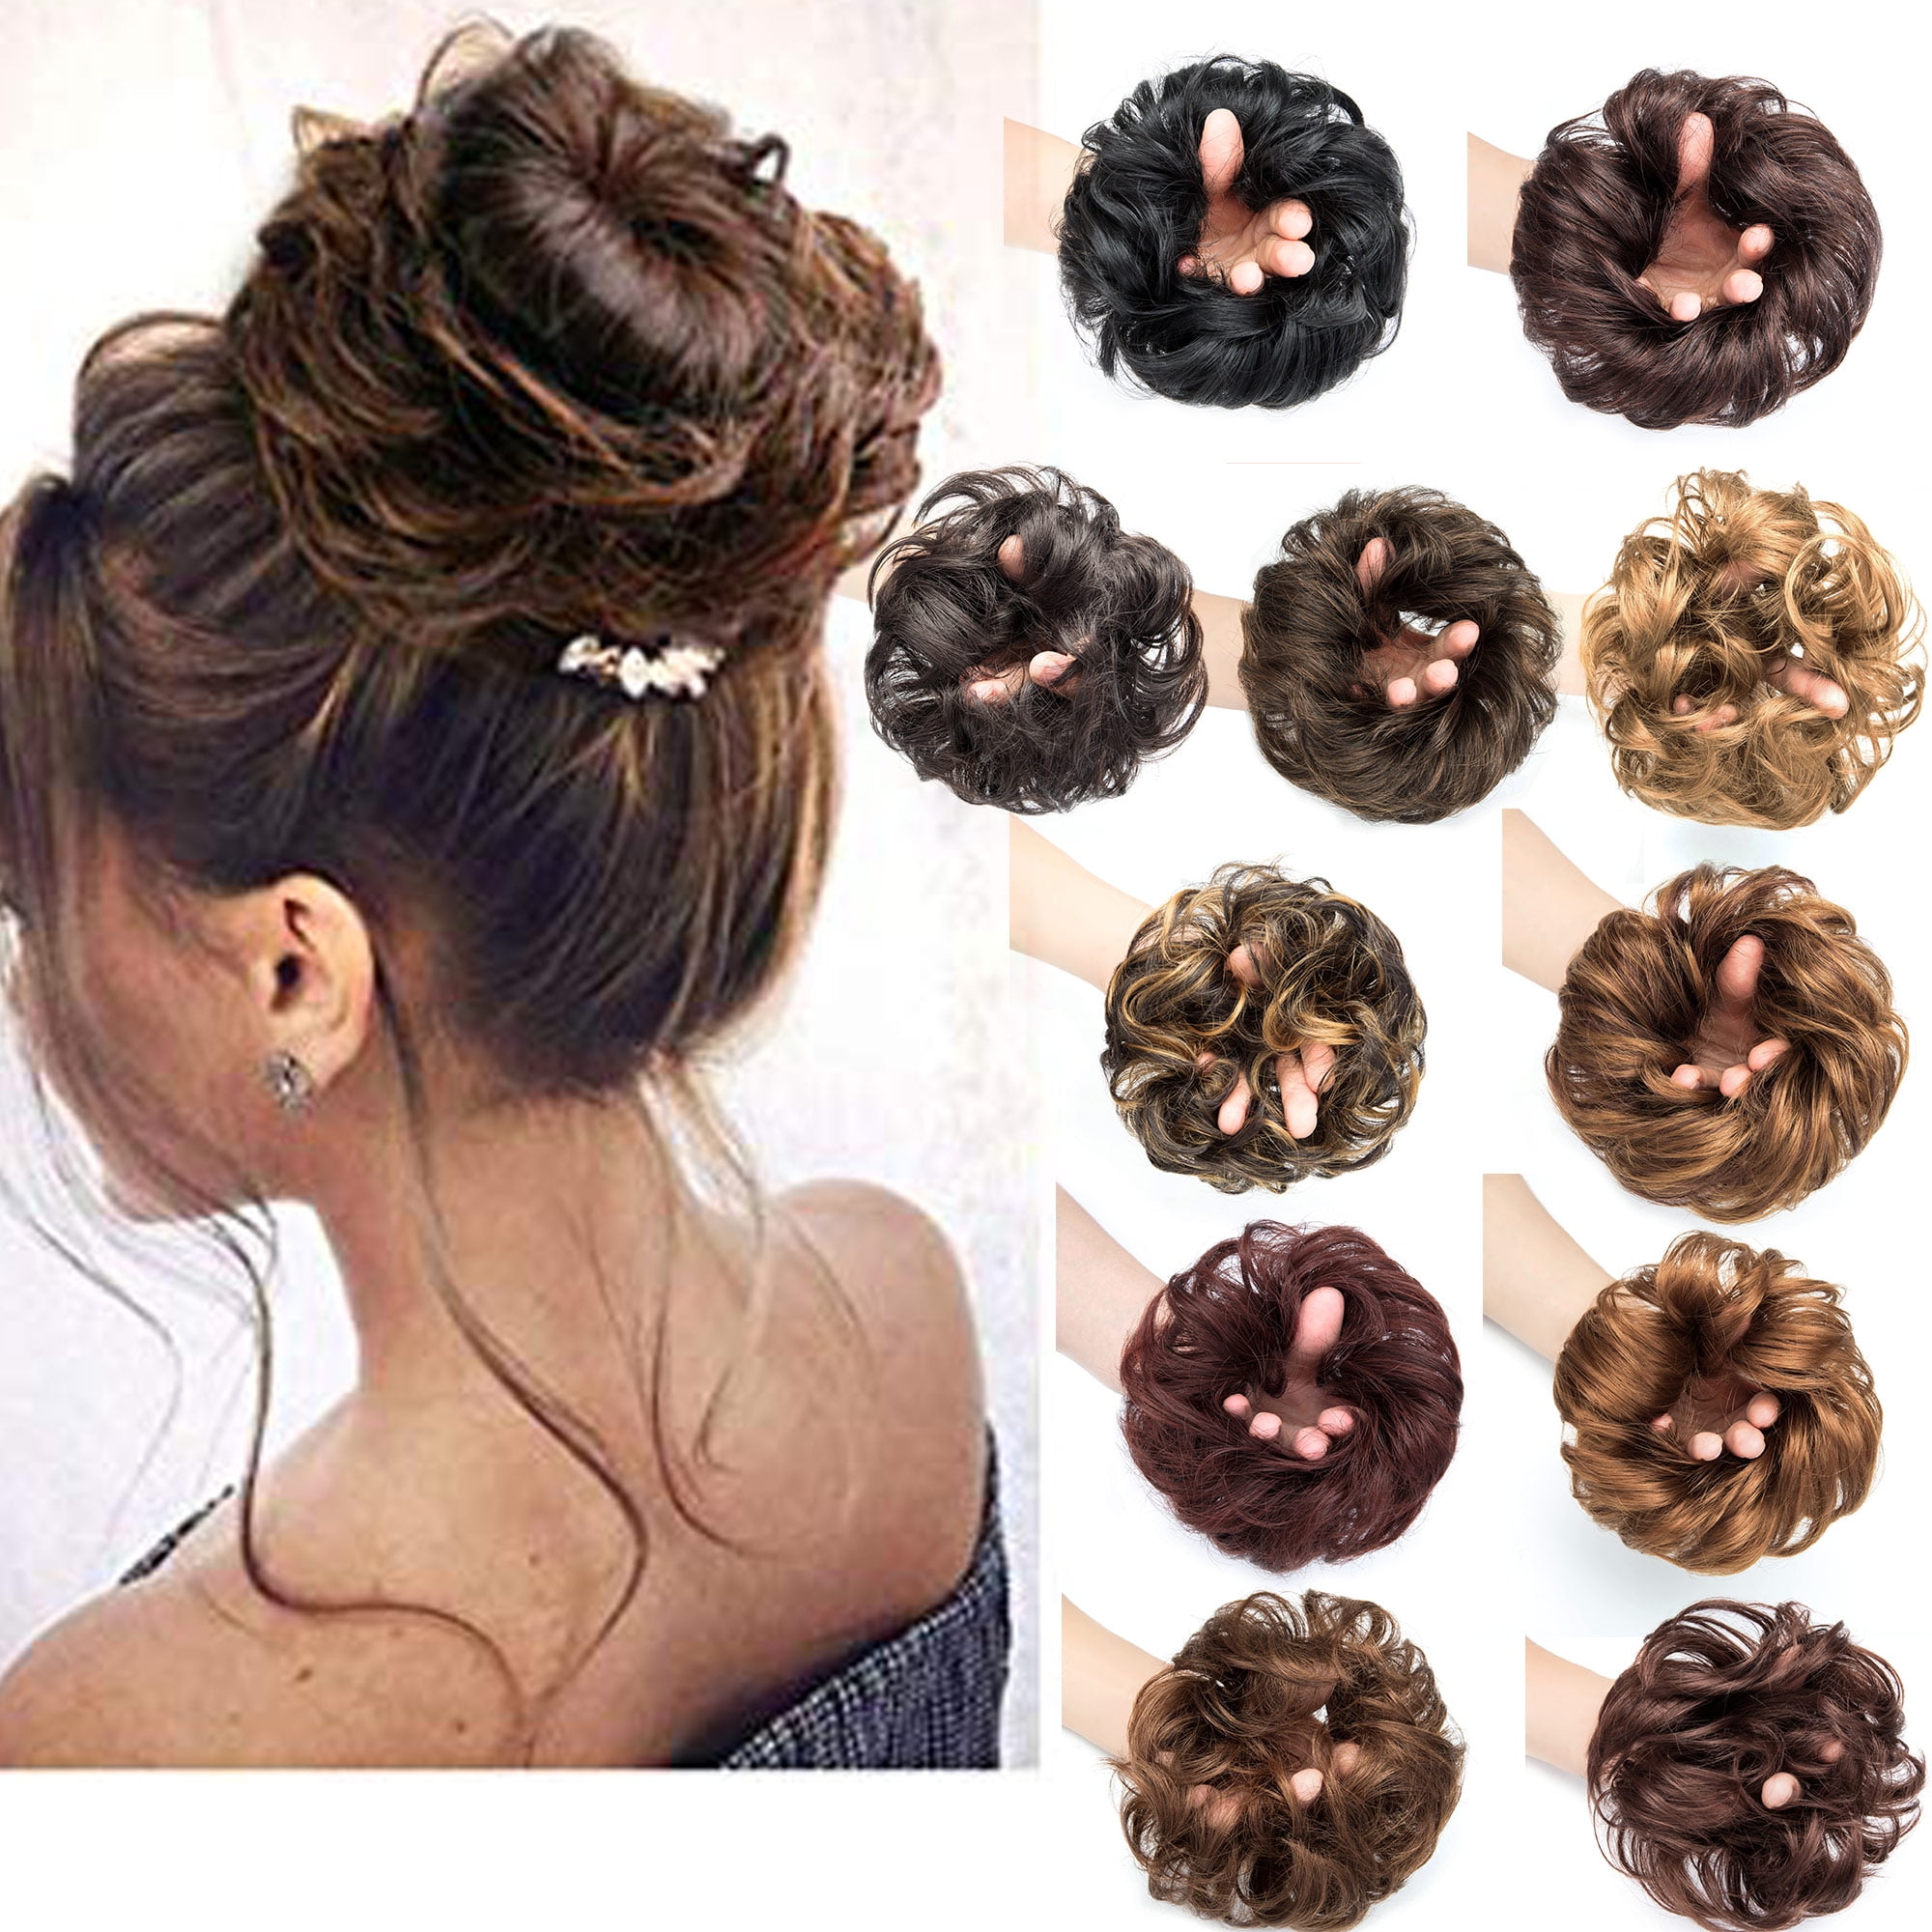 100% Human Hair Scrunchies Natural Black BARSDAR Curly Messy Bun Hairpiece Extensions Wedding Hair Pieces for Women Kids Messy Bun Real Hair Updo Donut Chignons 1#